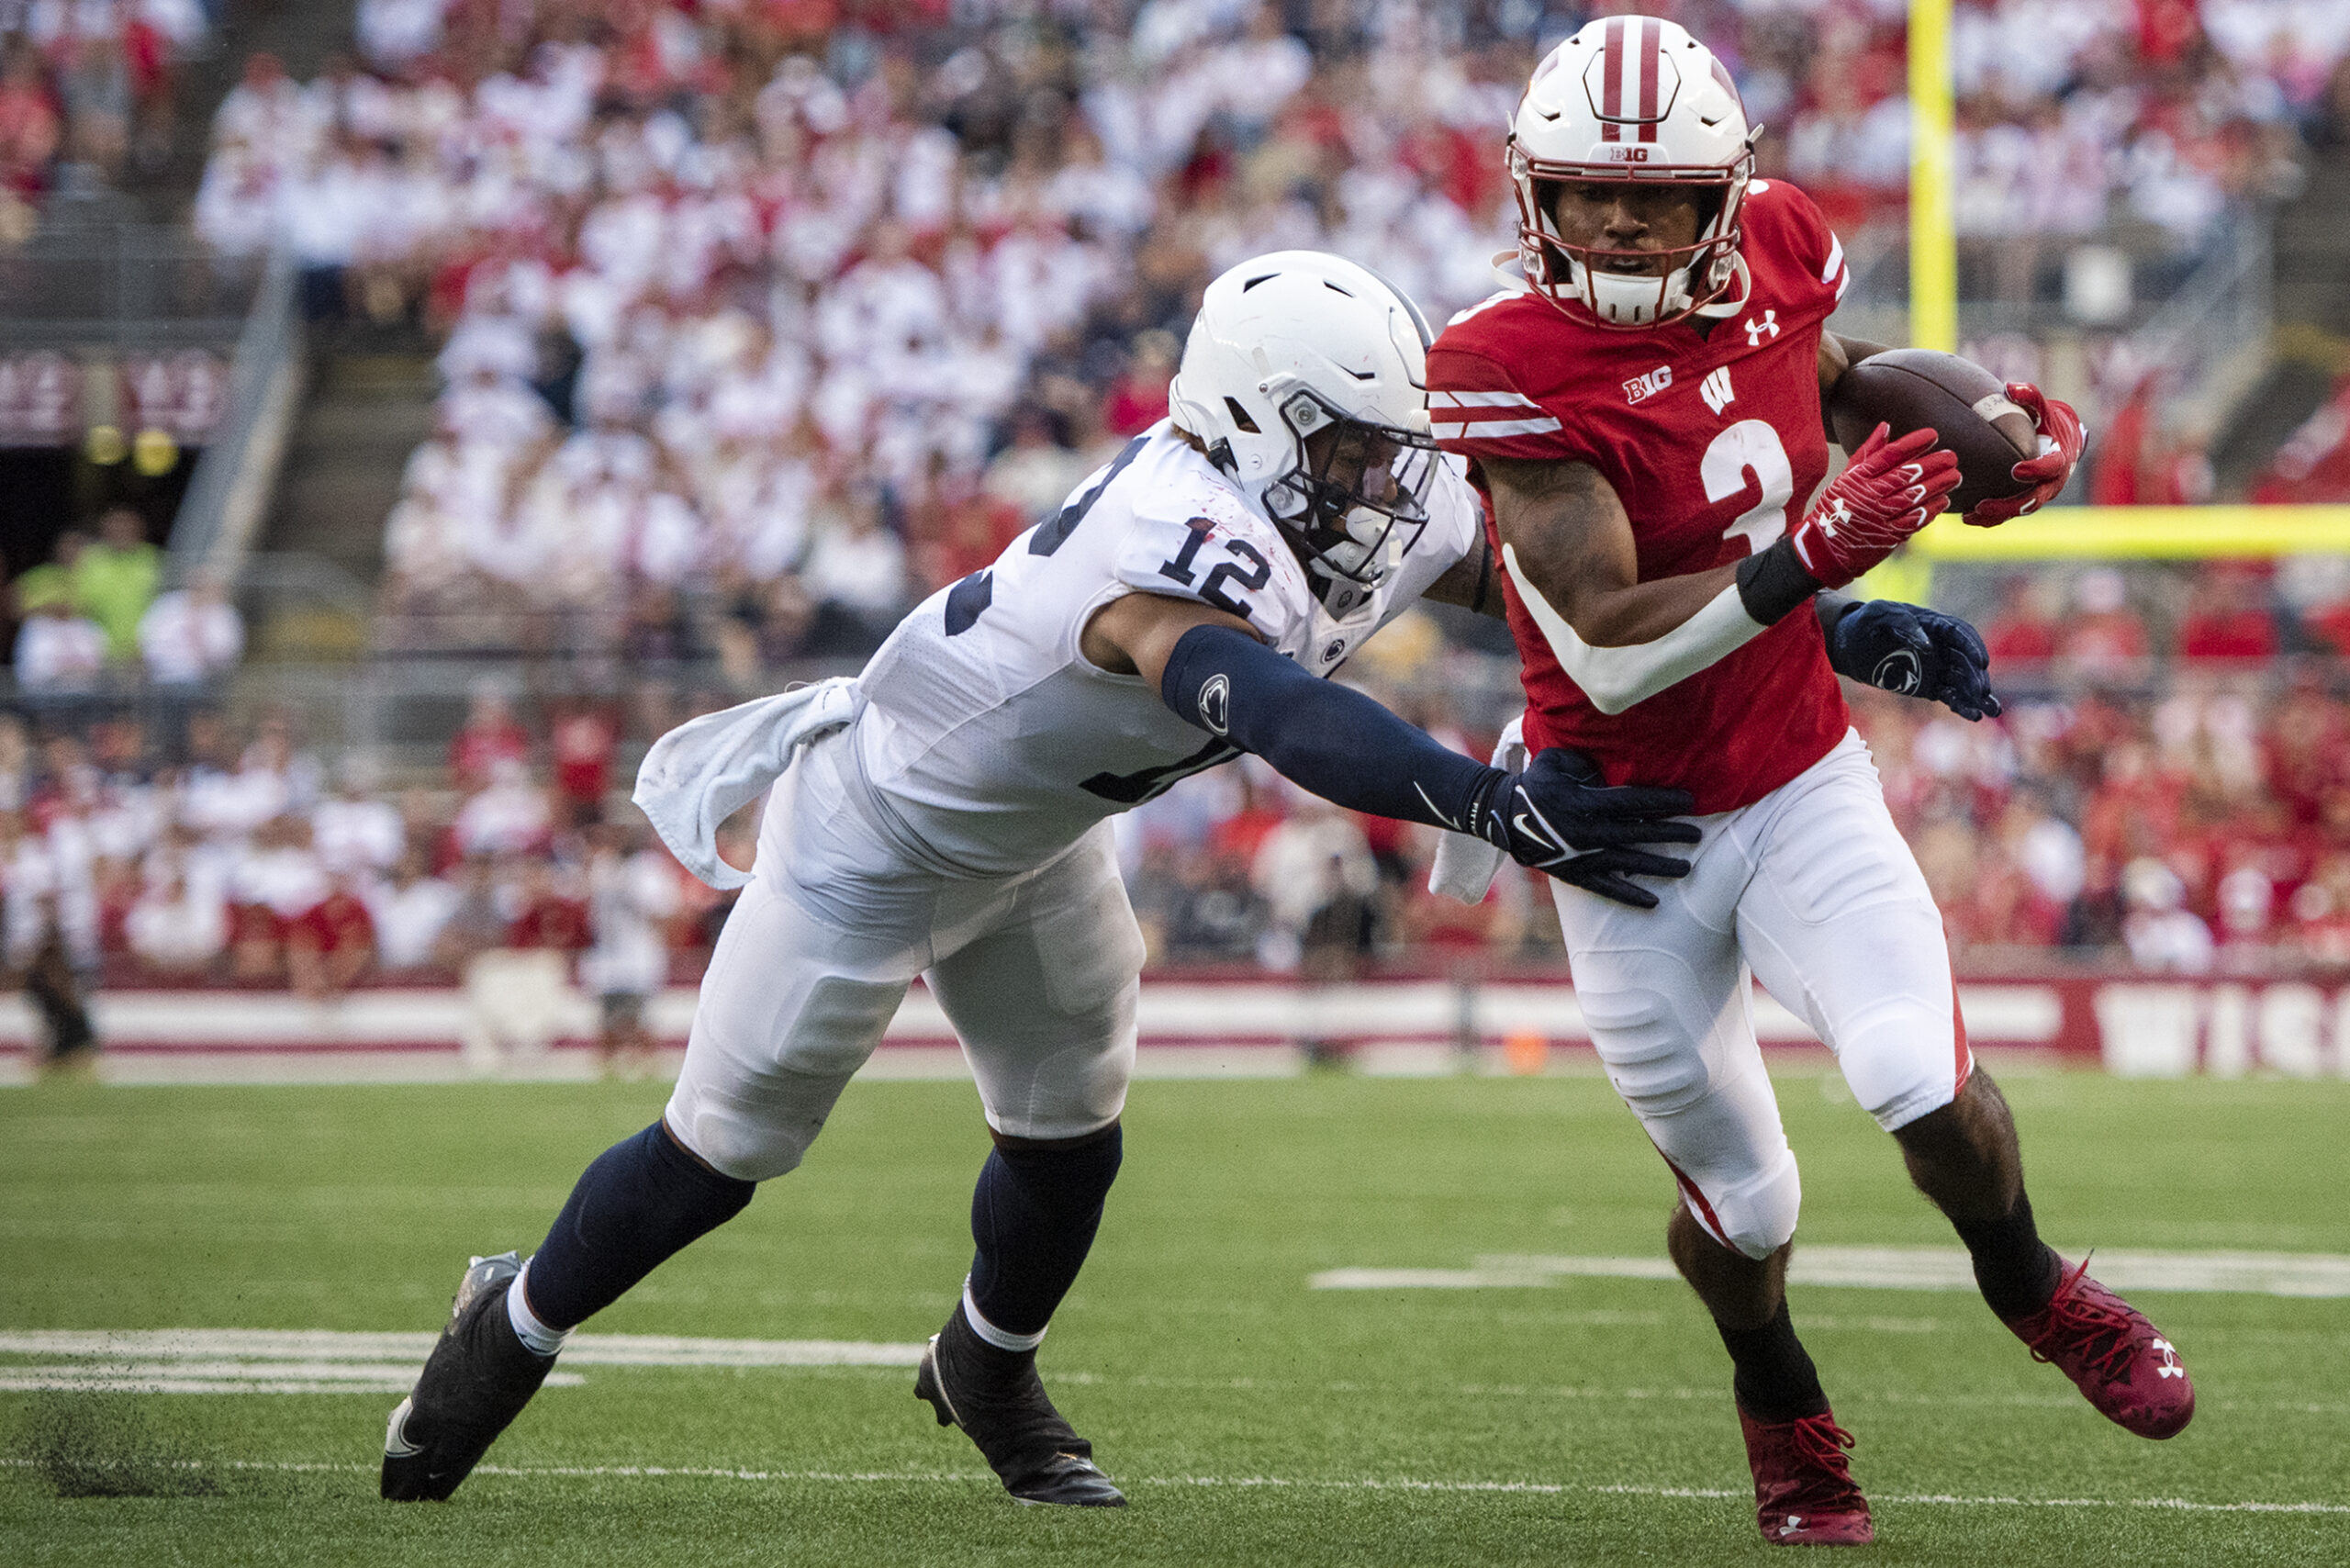 A Wisconsin player holds the ball and runs as a Penn State dives to tackle him.